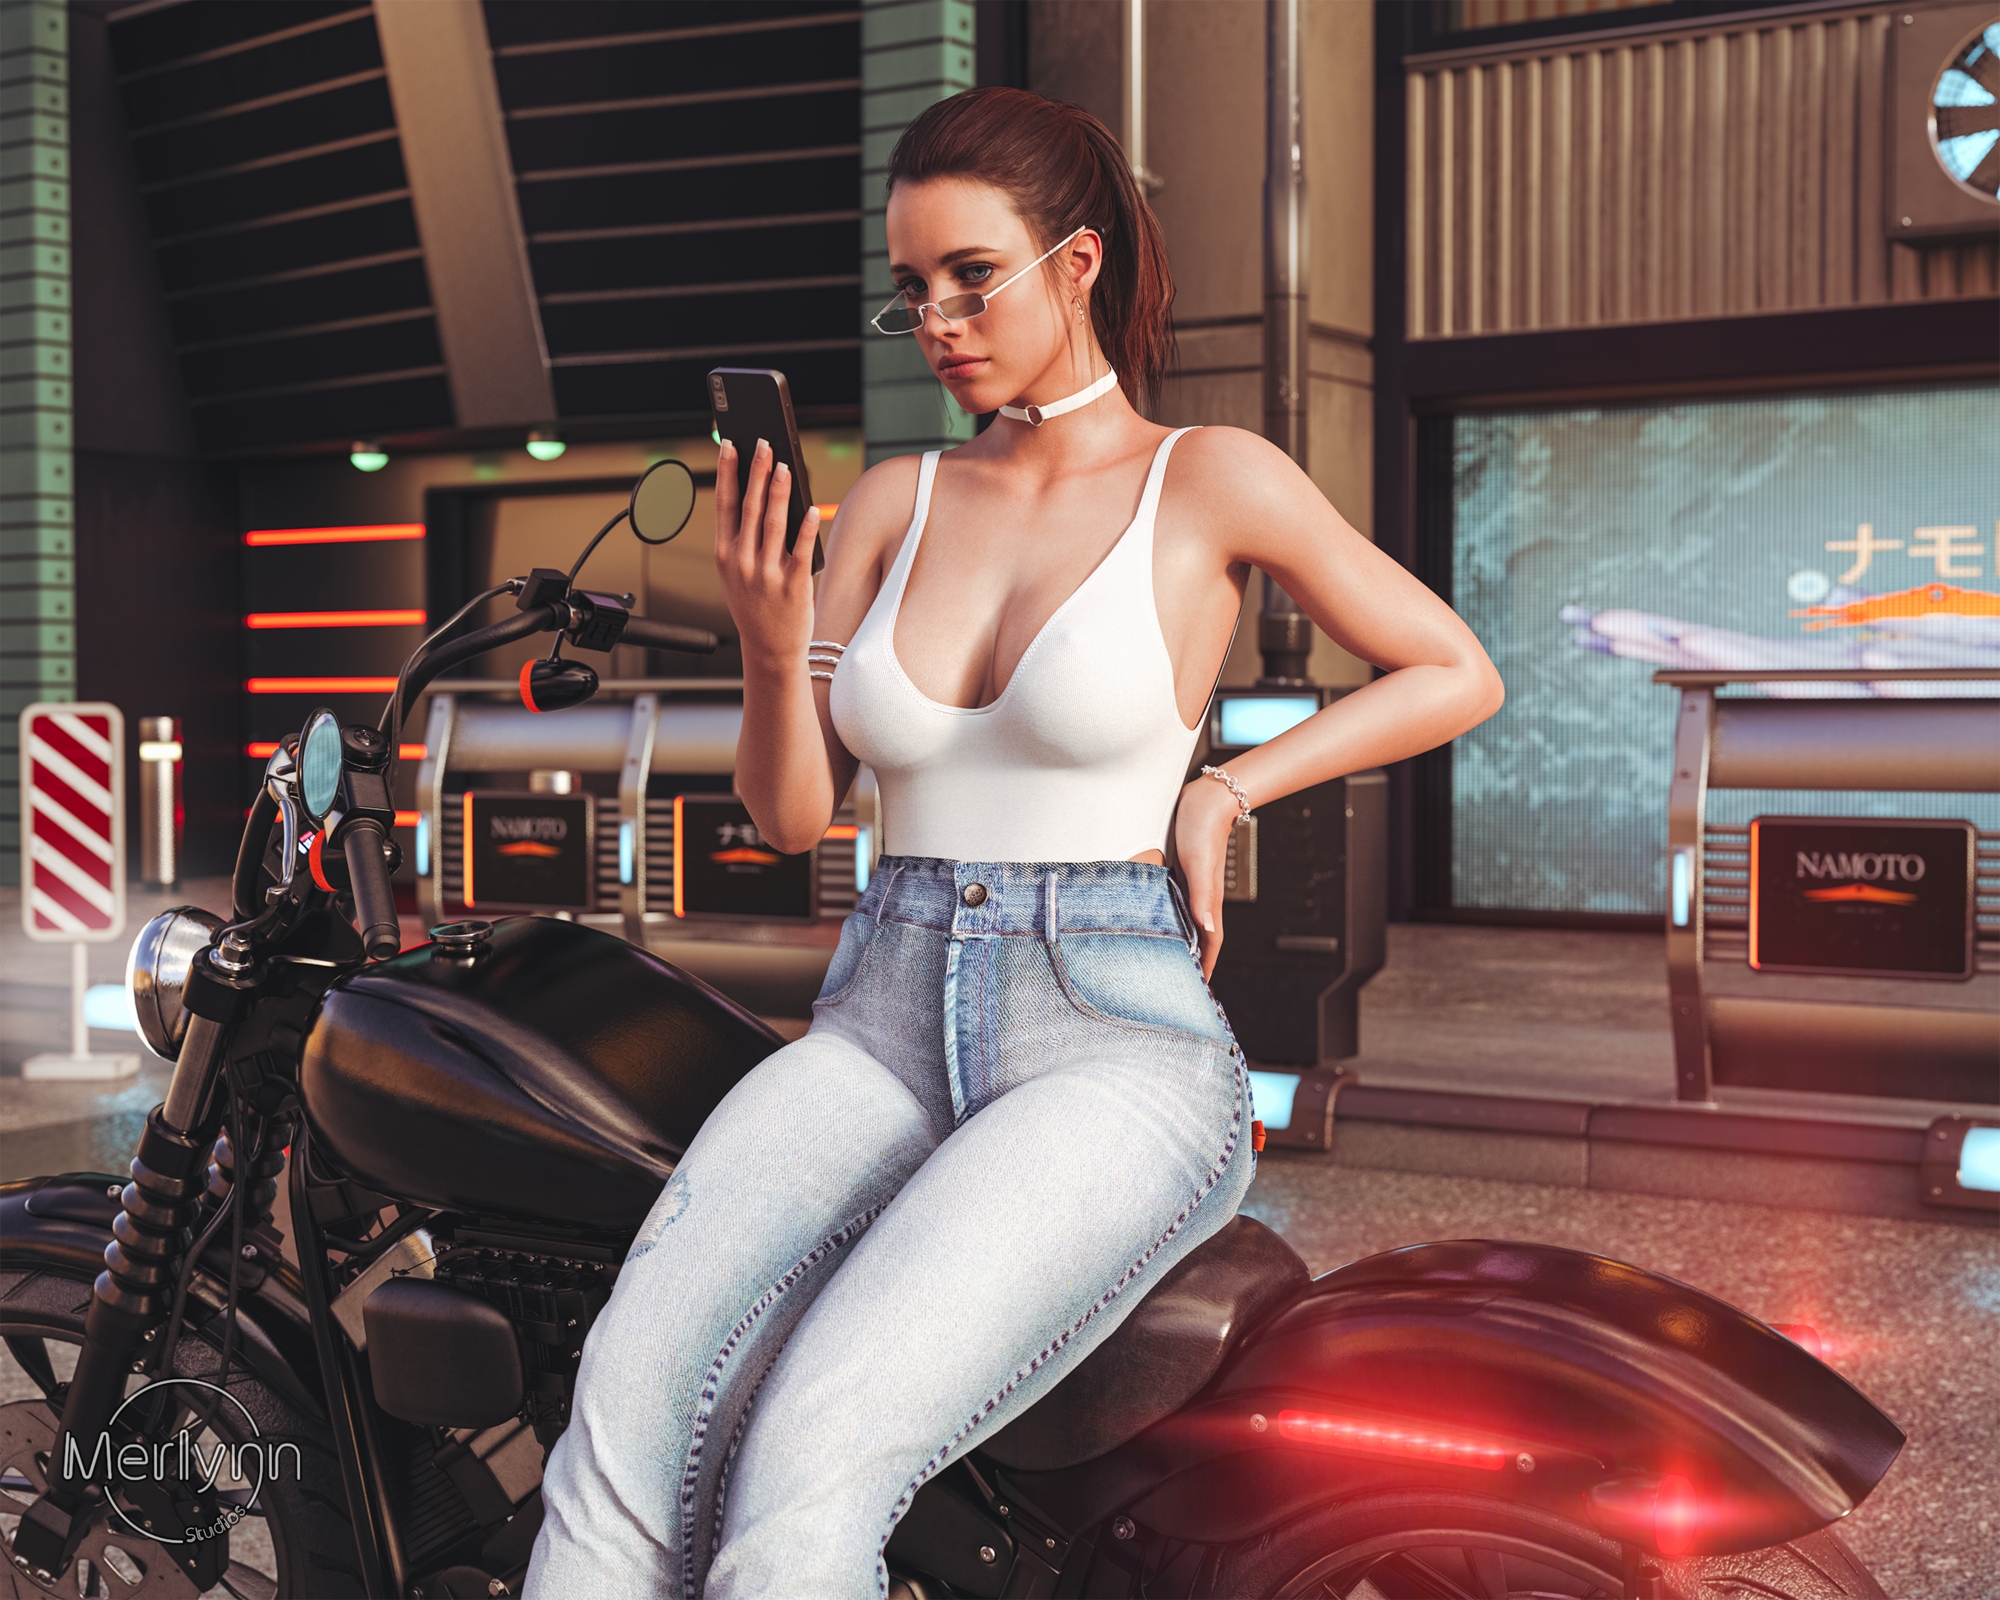  What ur lookin at?  Mama Death Stranding Videogame Game Sexy Big Tits Big Breasts Cleavage Motorcycle Jeans Smartphone Hot Brunette